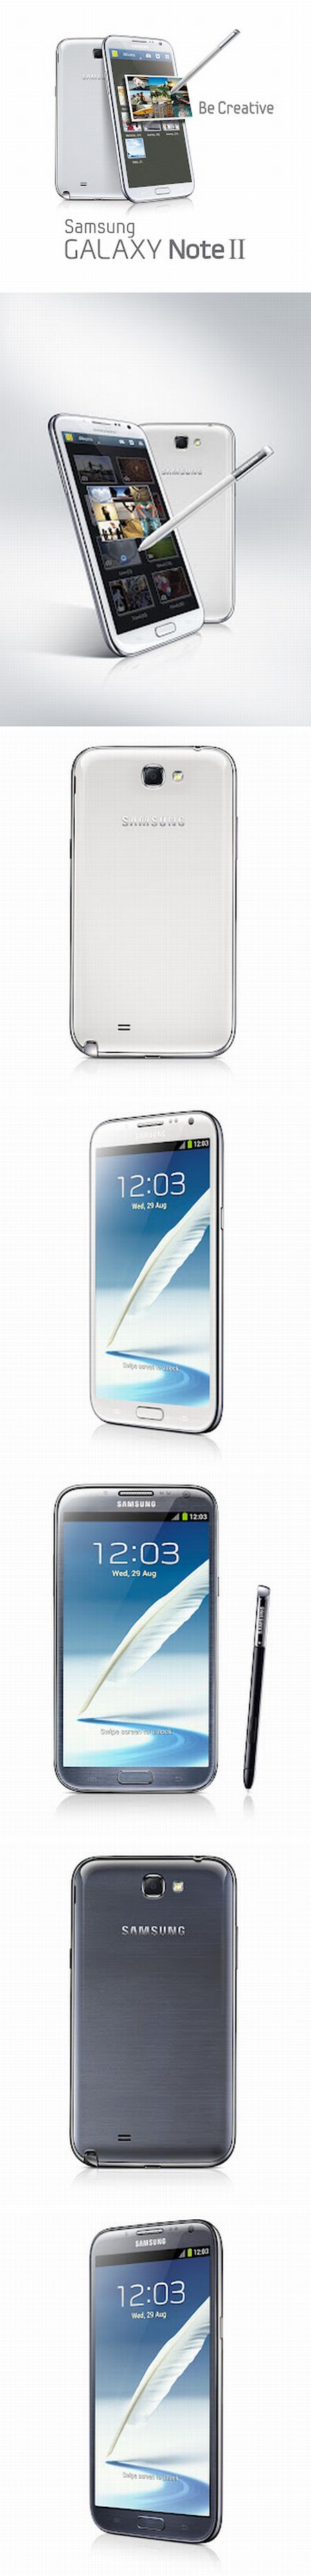 IFA2012 - Samsung Galaxy Note II: 5.5 col, Android 4.1, négy mag